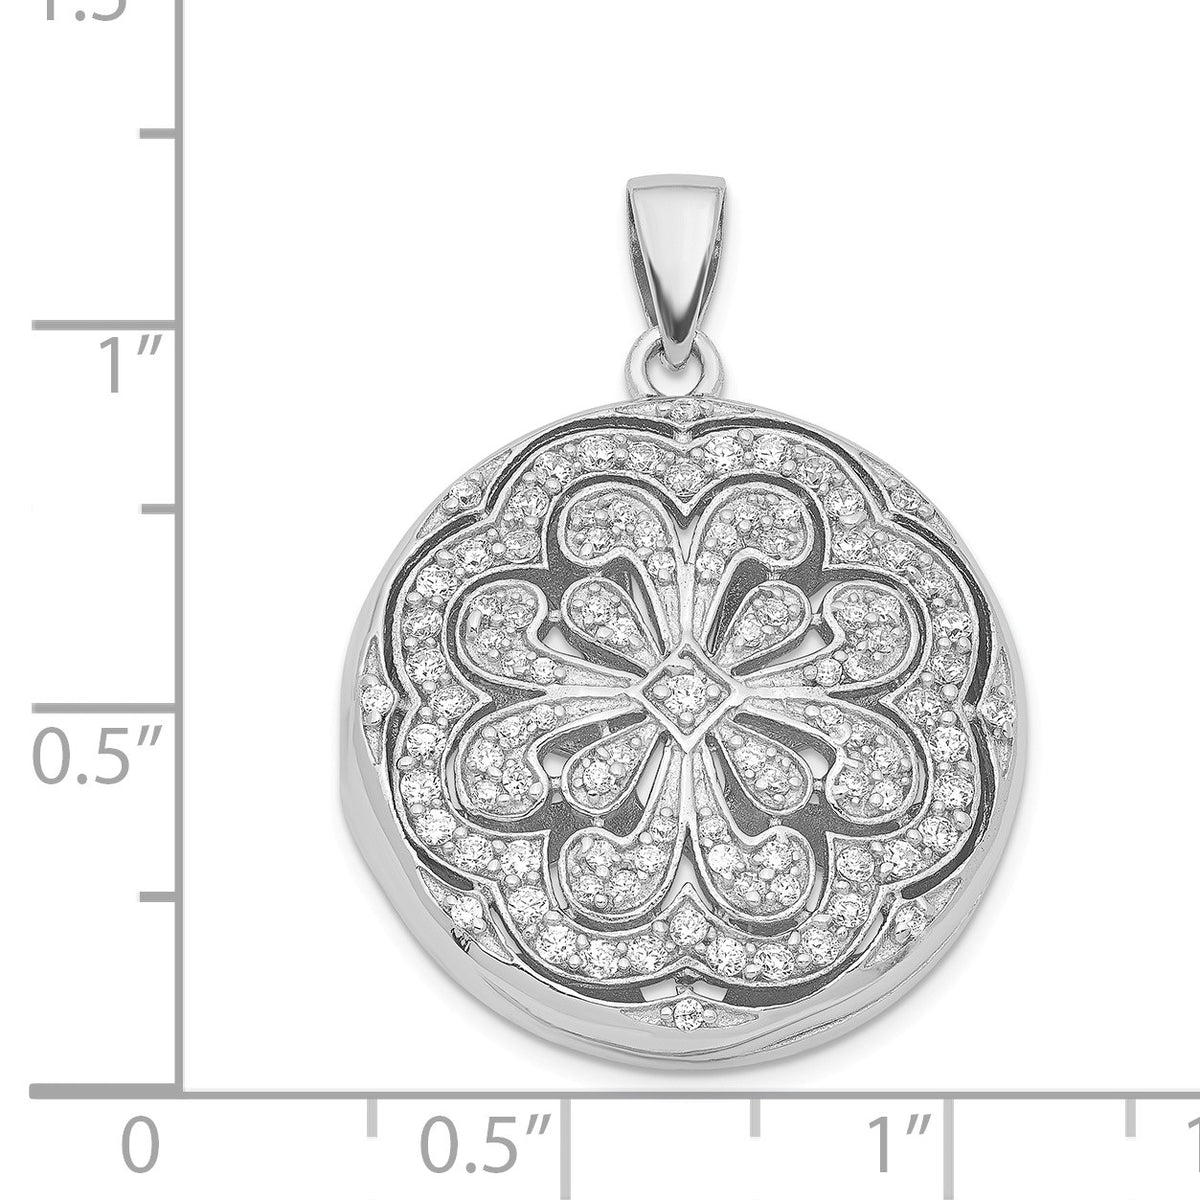 Alternate view of the Sterling Silver and Cubic Zirconia Flower Design Locket, 22mm by The Black Bow Jewelry Co.